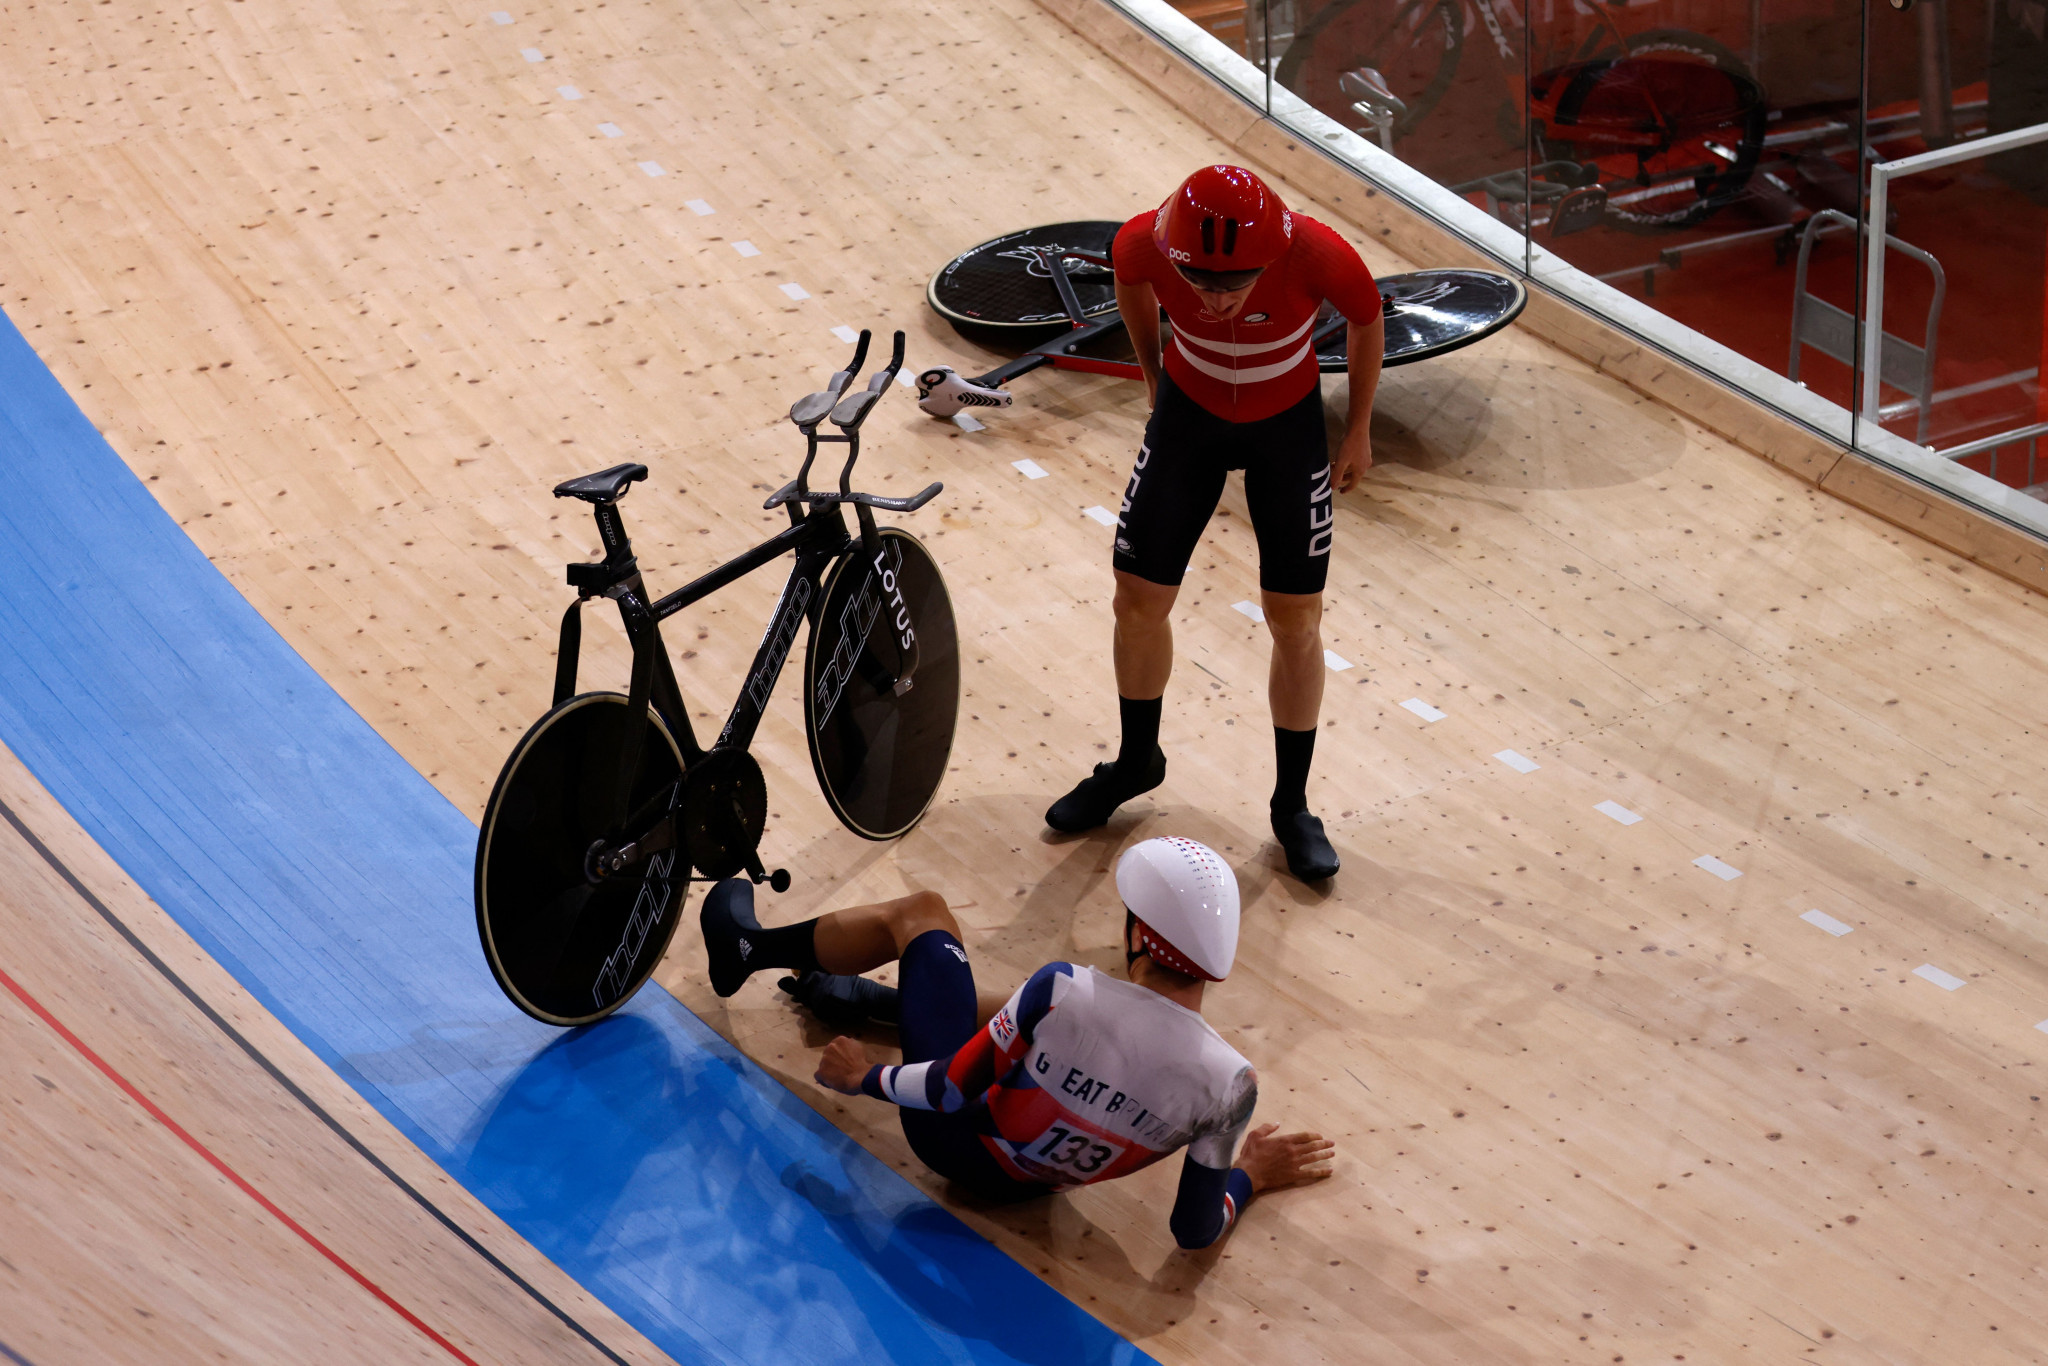 A bizarre crash led to uncertainty over the qualifiers for tomorrow's men's team pursuit medal rides ©Getty Images